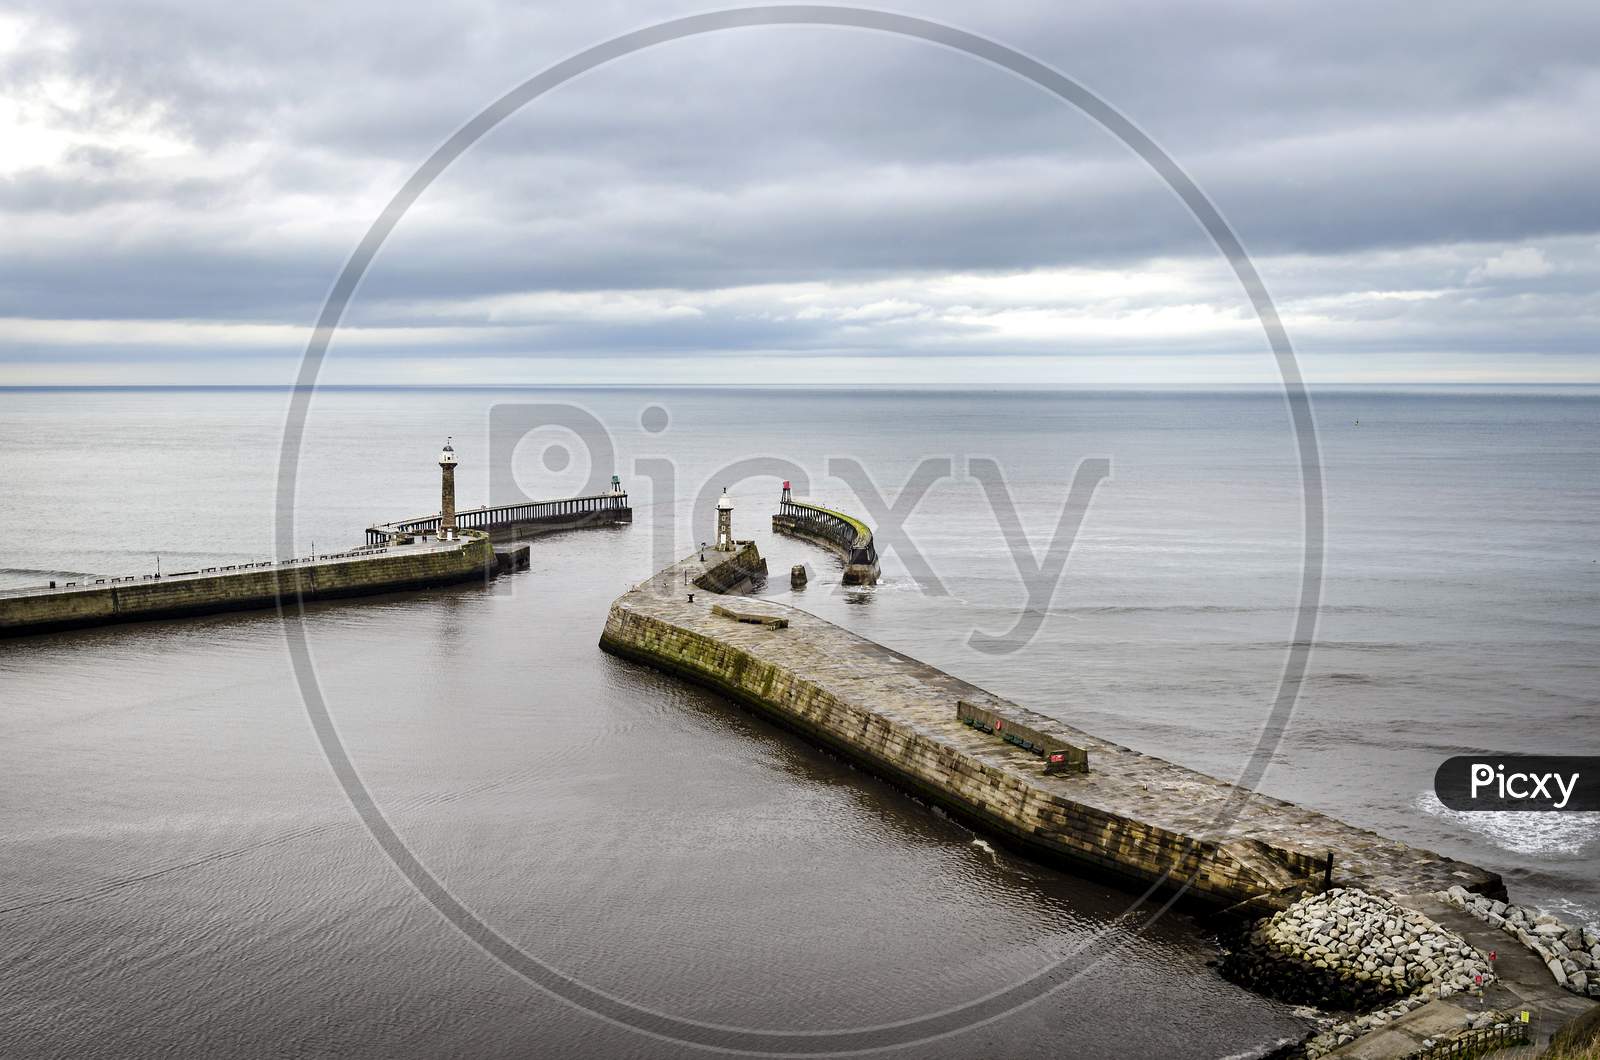 A view of Whitby harbour showing the entrance and lighthouse as seen from above.